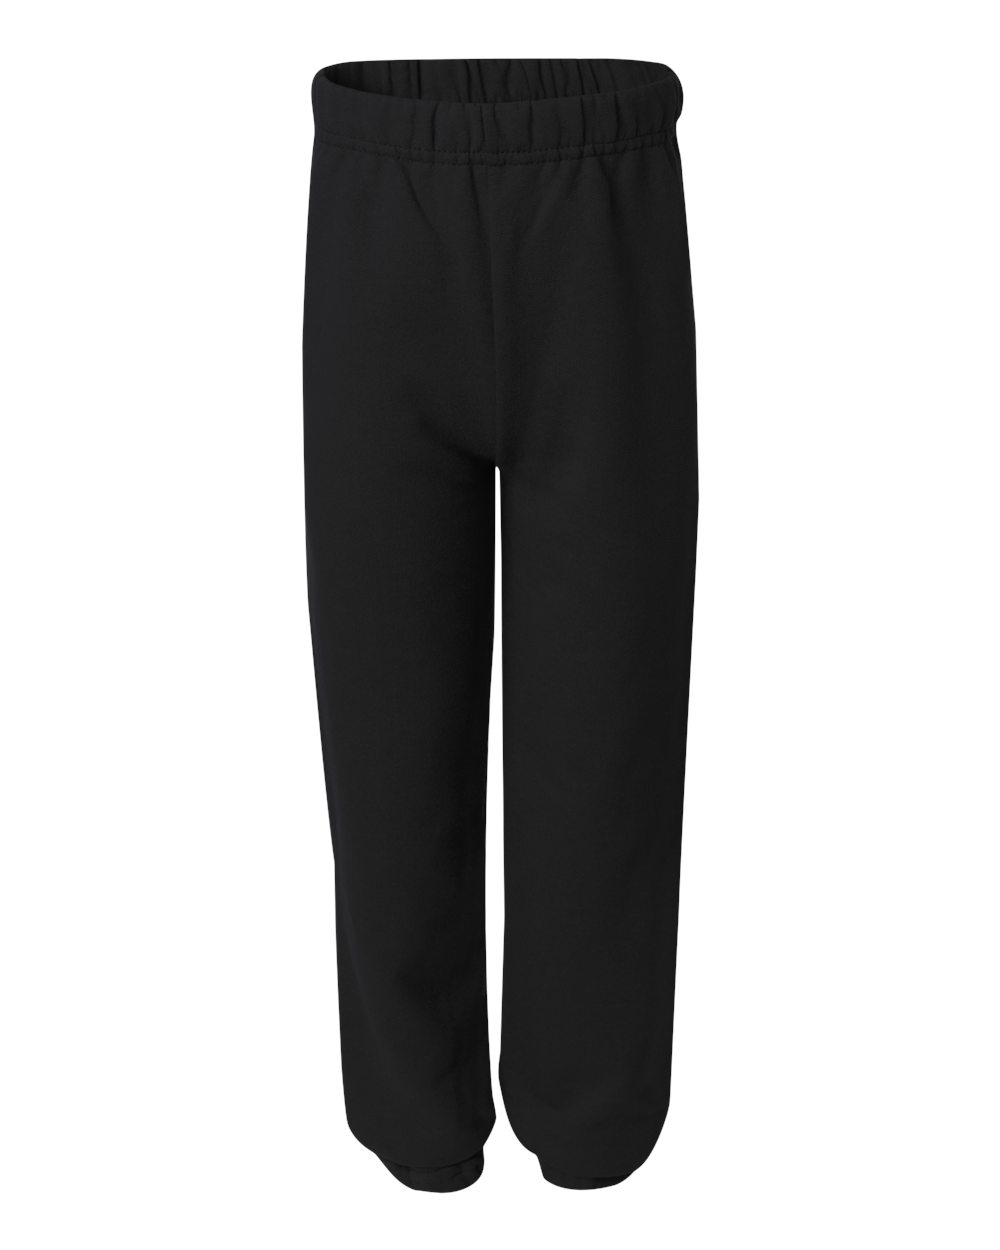 Picture of Jerzees Nublend Youth Fleece Pants